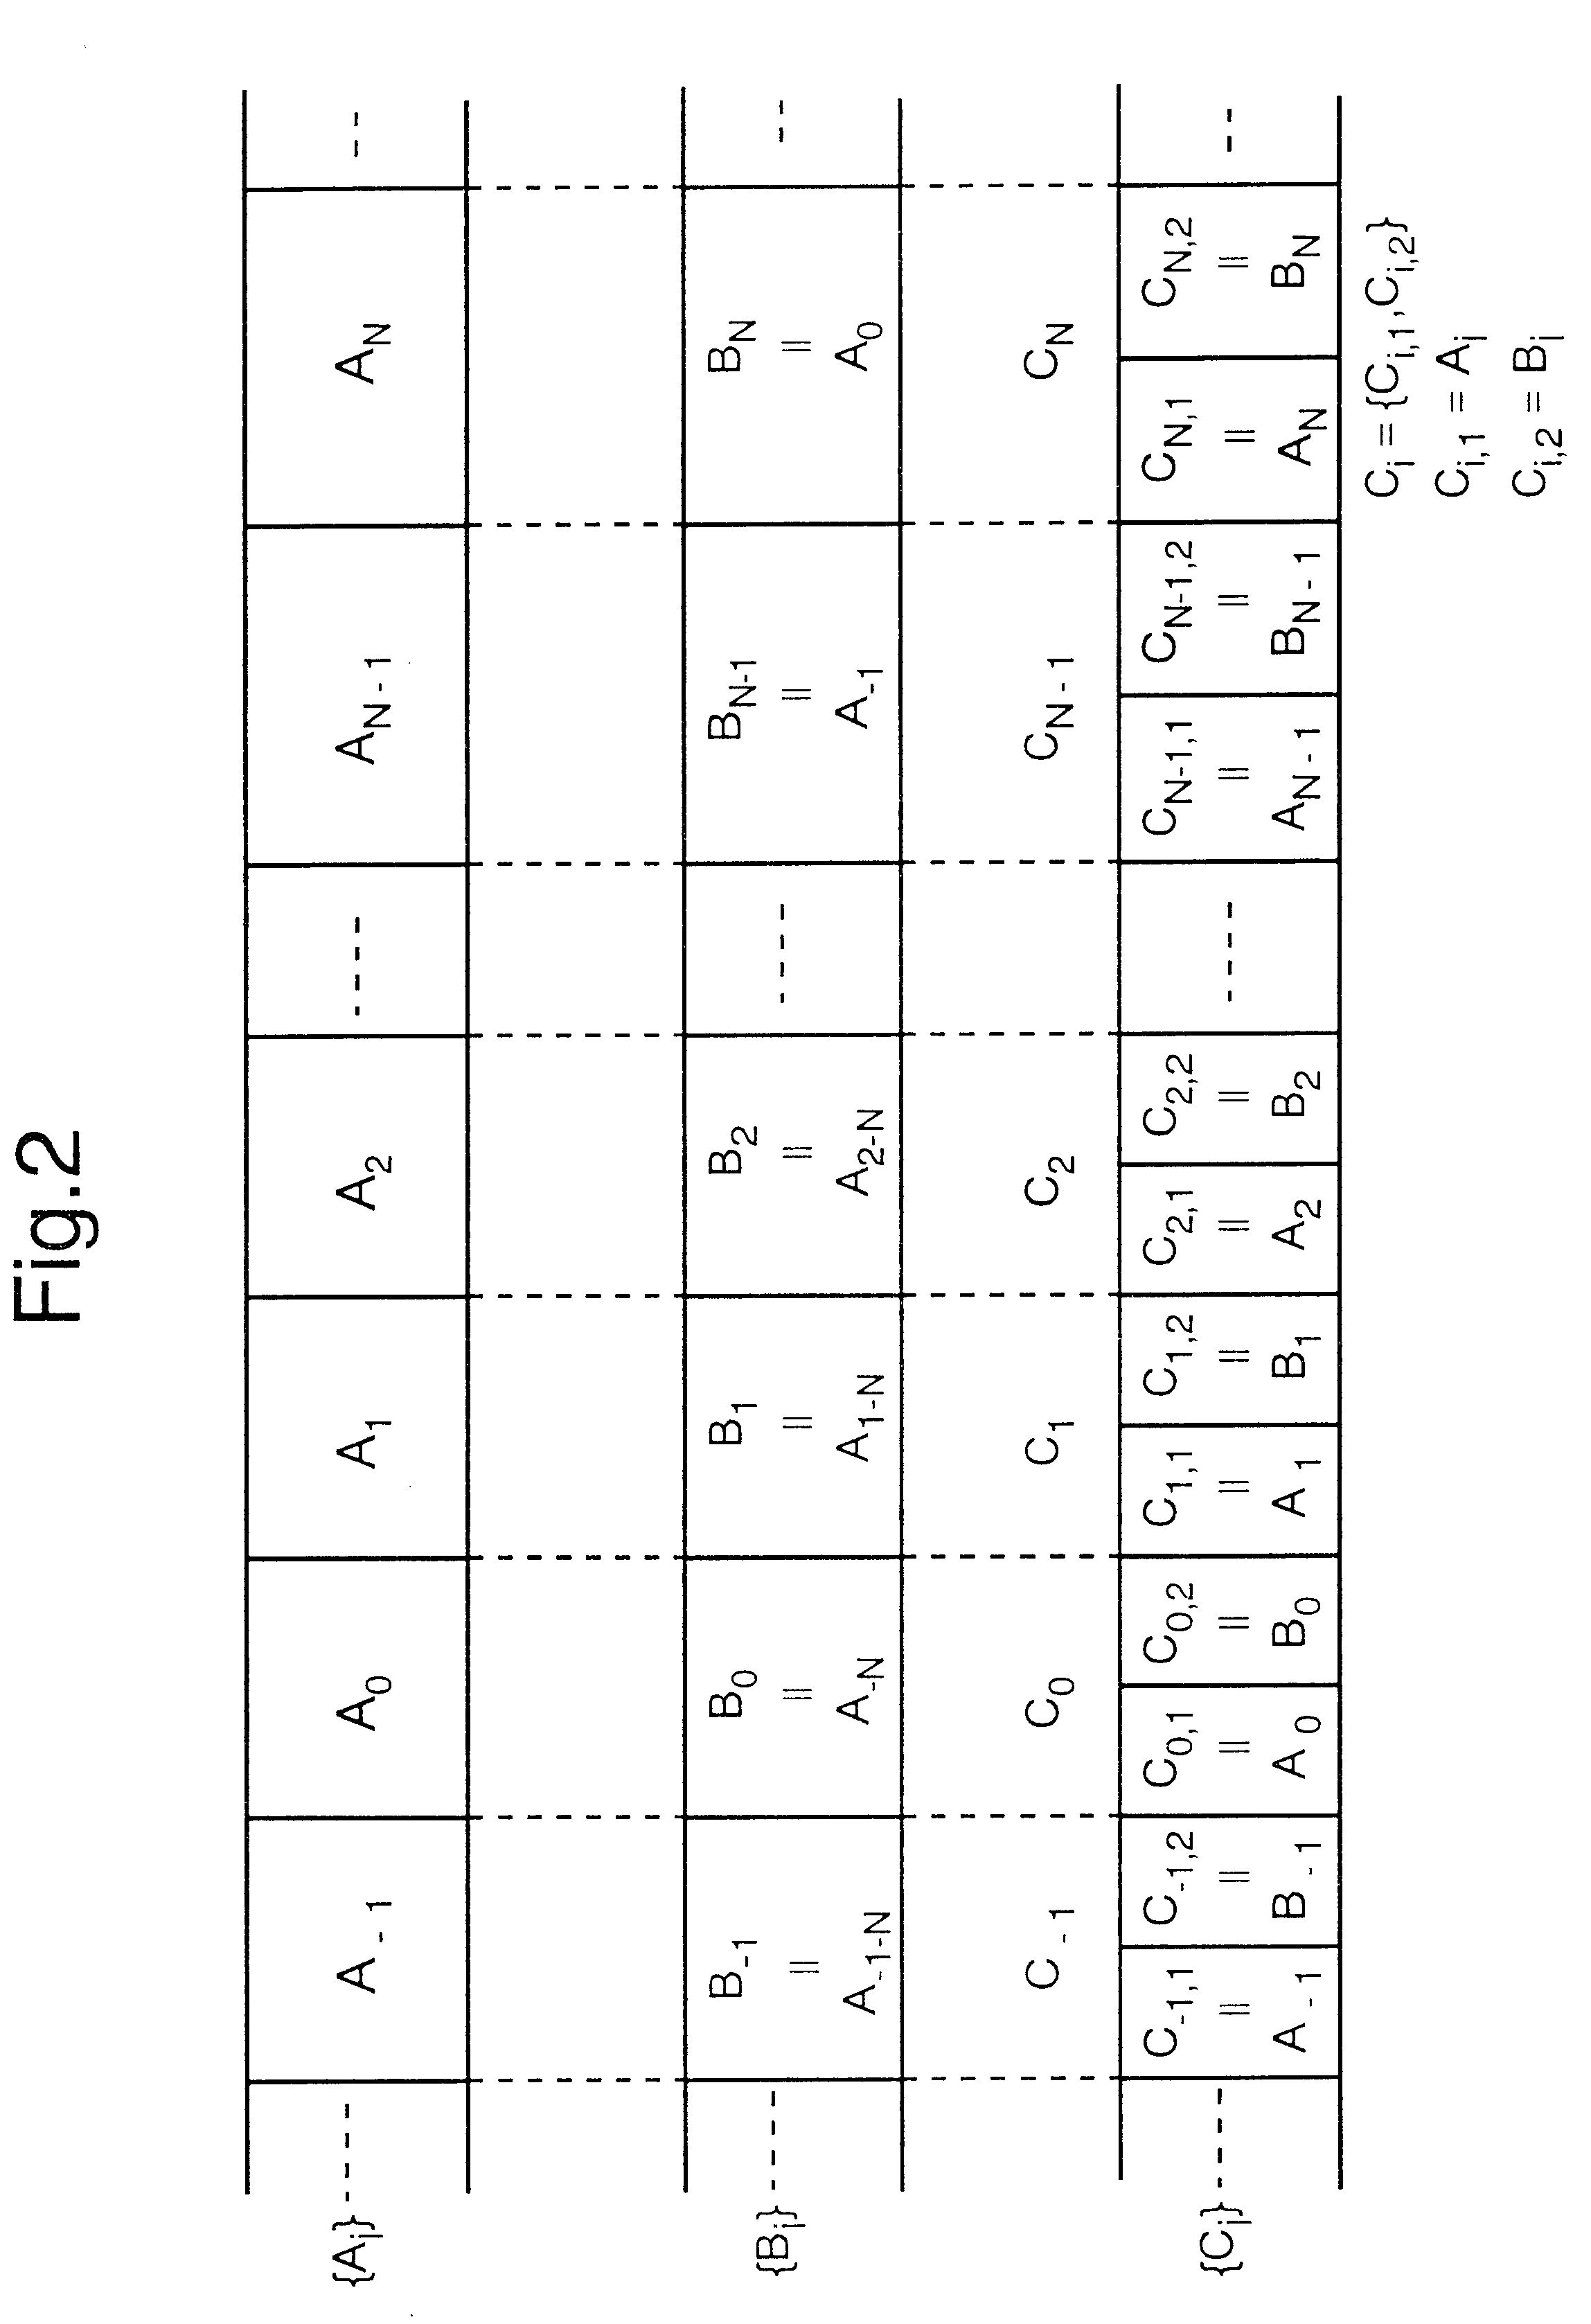 Automatic frequency control communication system